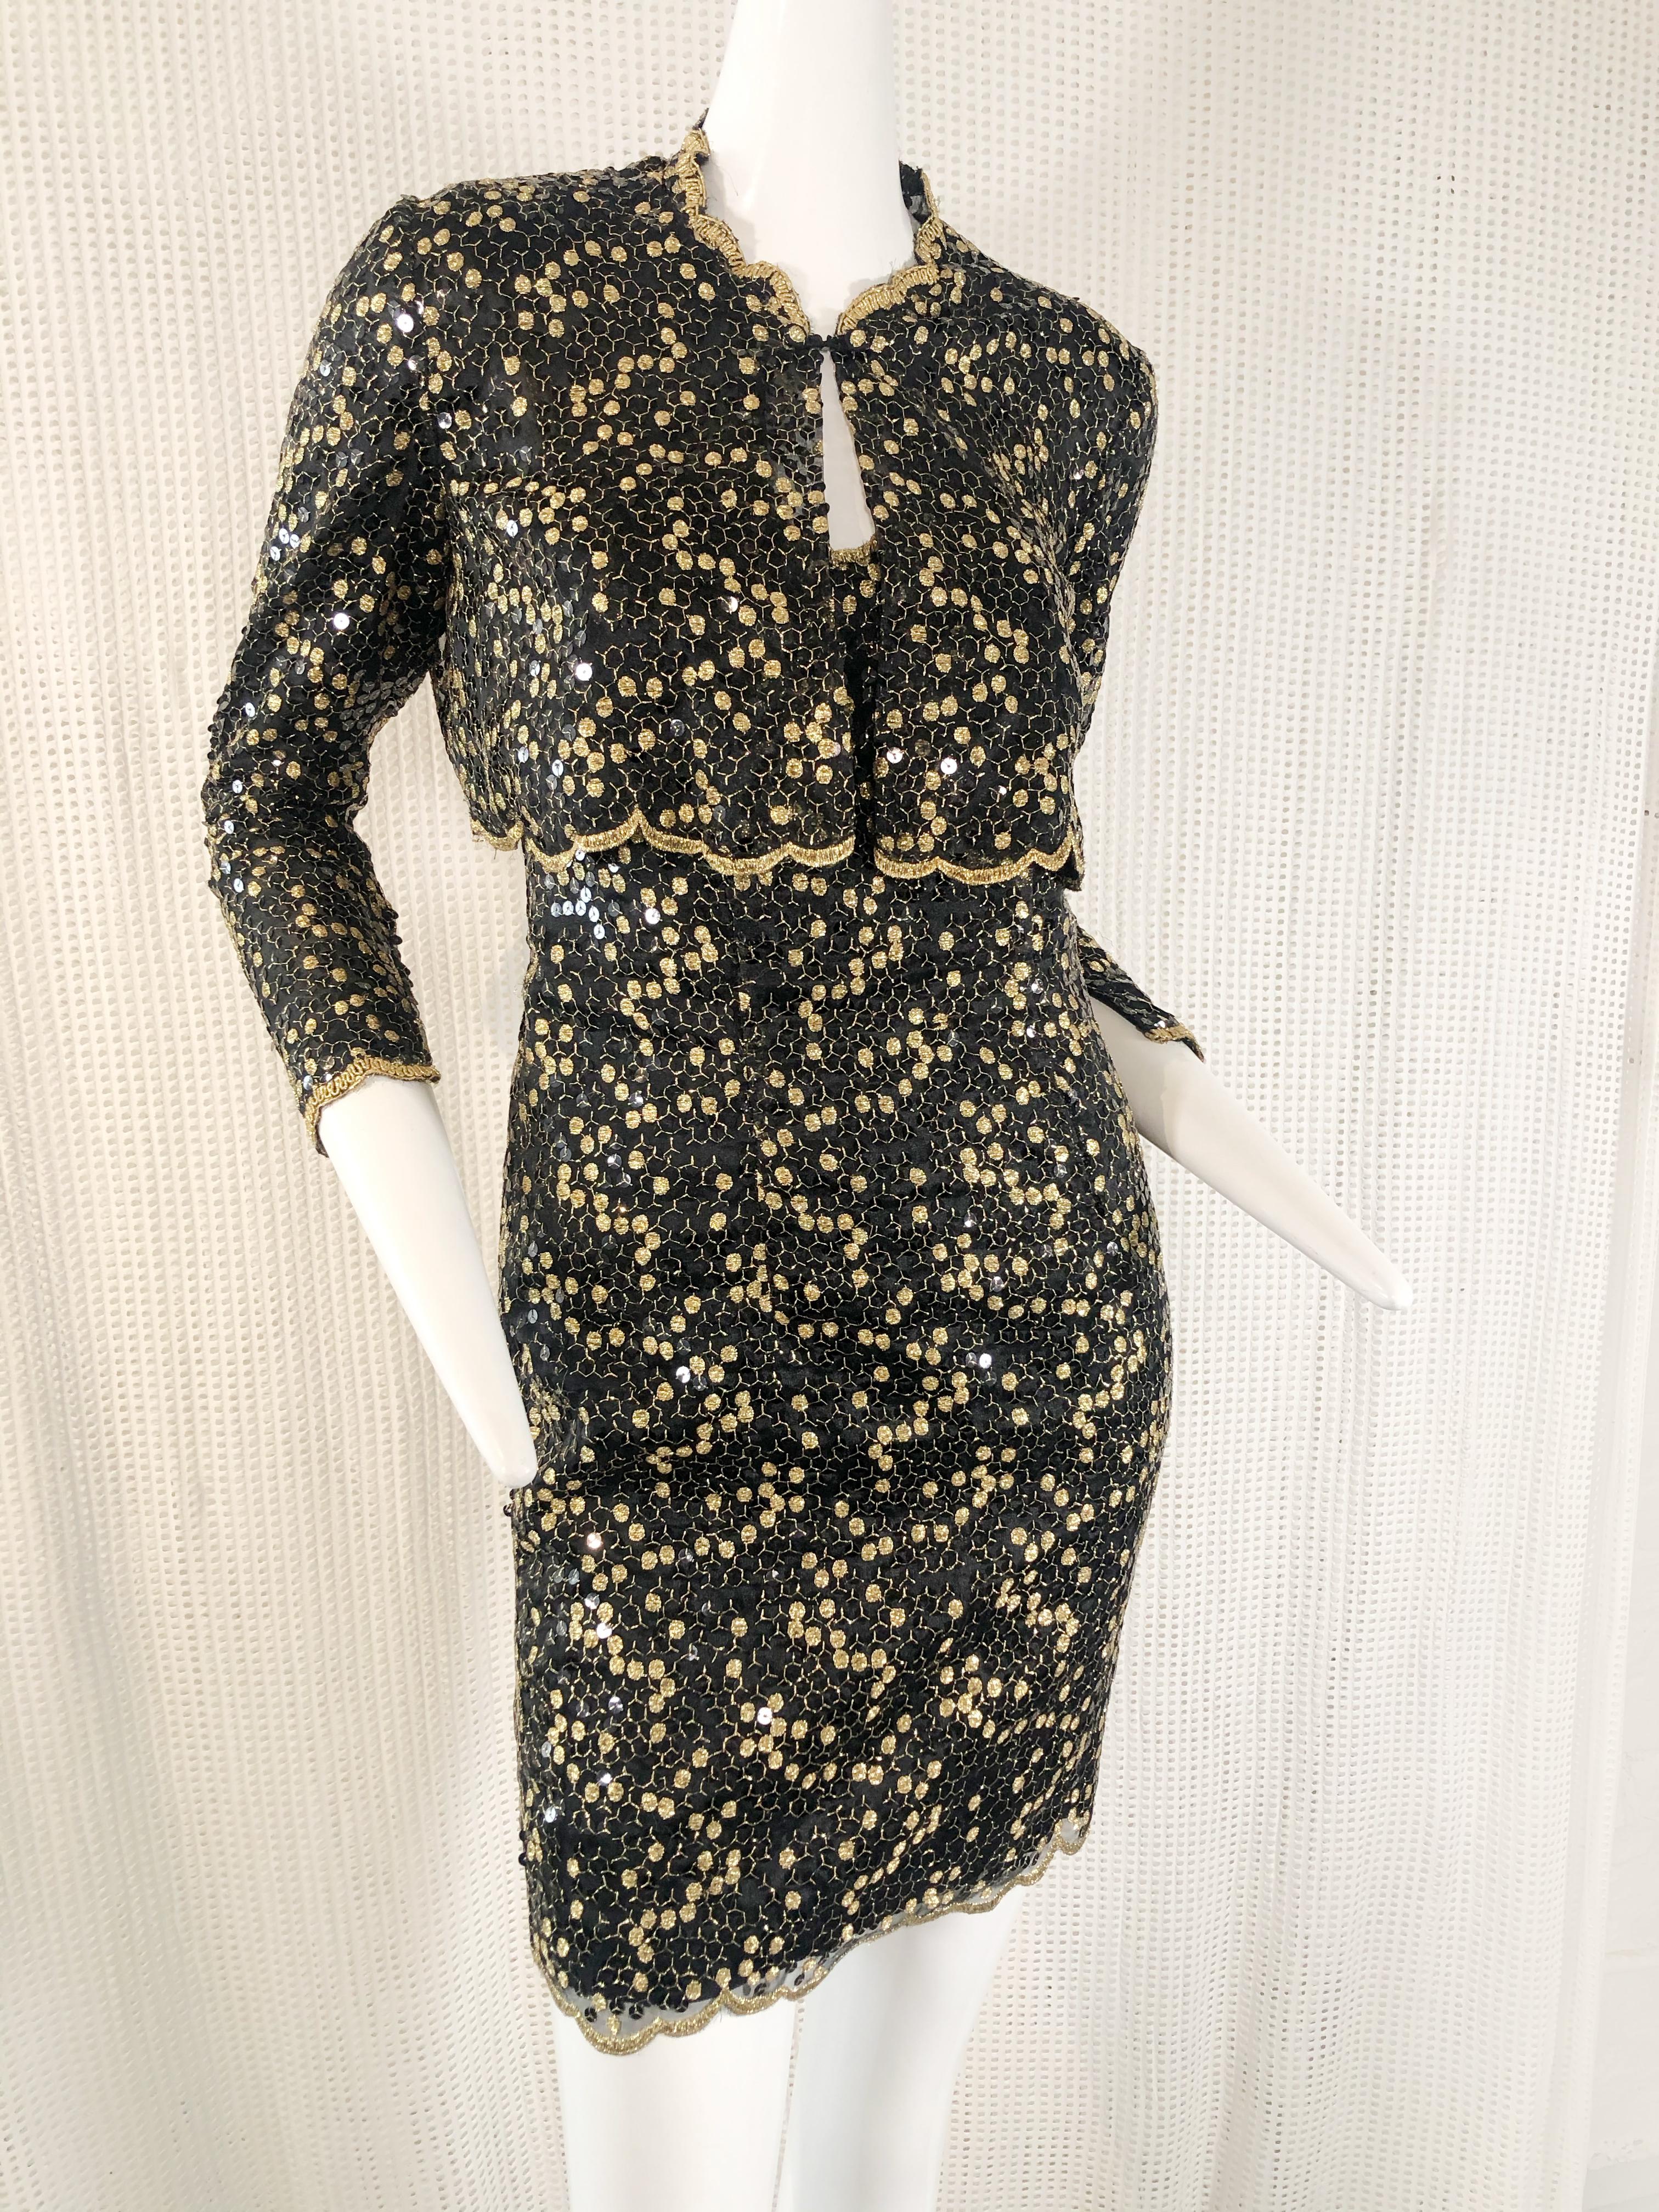 A sassy 1980s Pauline Trigere black mini dress with spaghetti straps and scalloped lace hemline.  Long sleeved bolero style jacket has the same scalloped lace hemline. Embellished all-over with scattered sequins and gold honeycomb embroidery. 